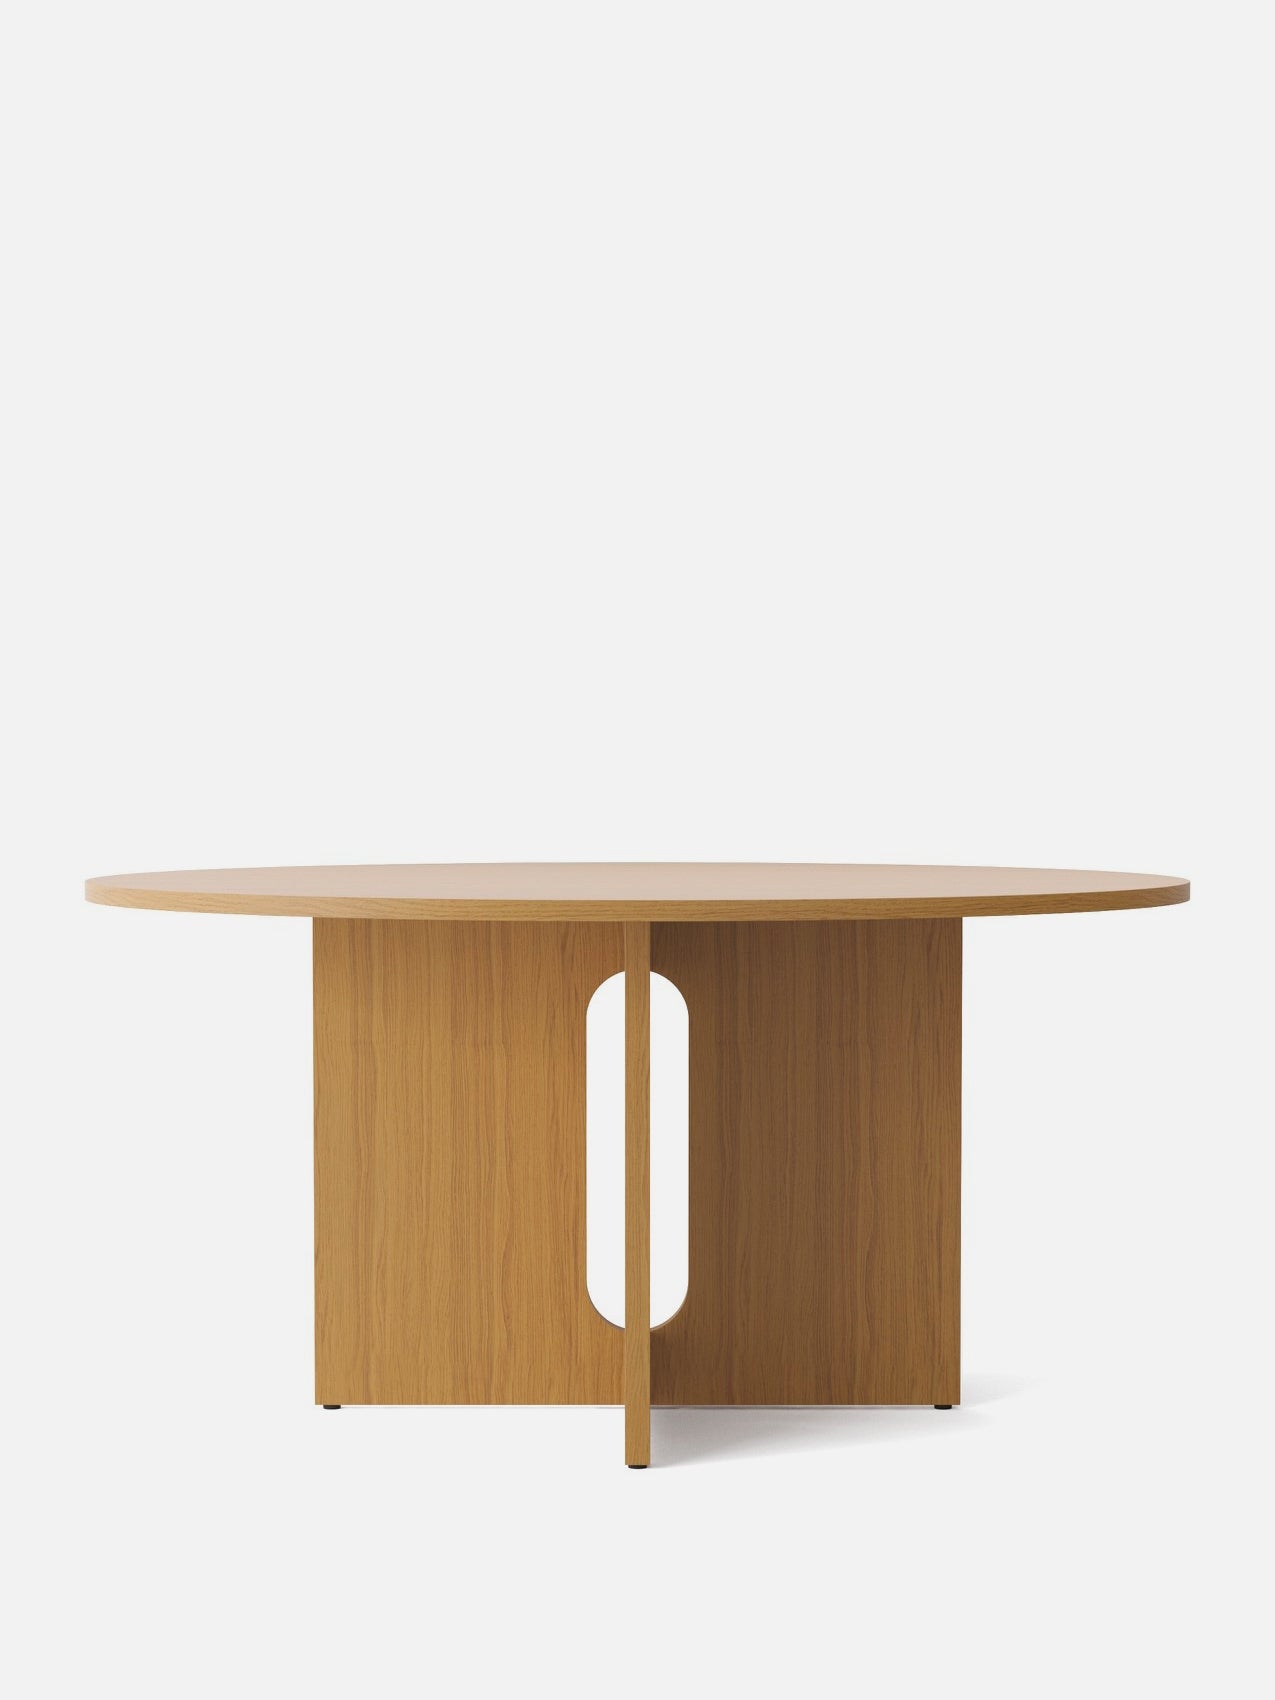 Androgyne Dining Table-Dining Table-Danielle Siggerud-Dining Height (59in)/Natural Oak-Round - Natural Oak-menu-minimalist-modern-danish-design-home-decor